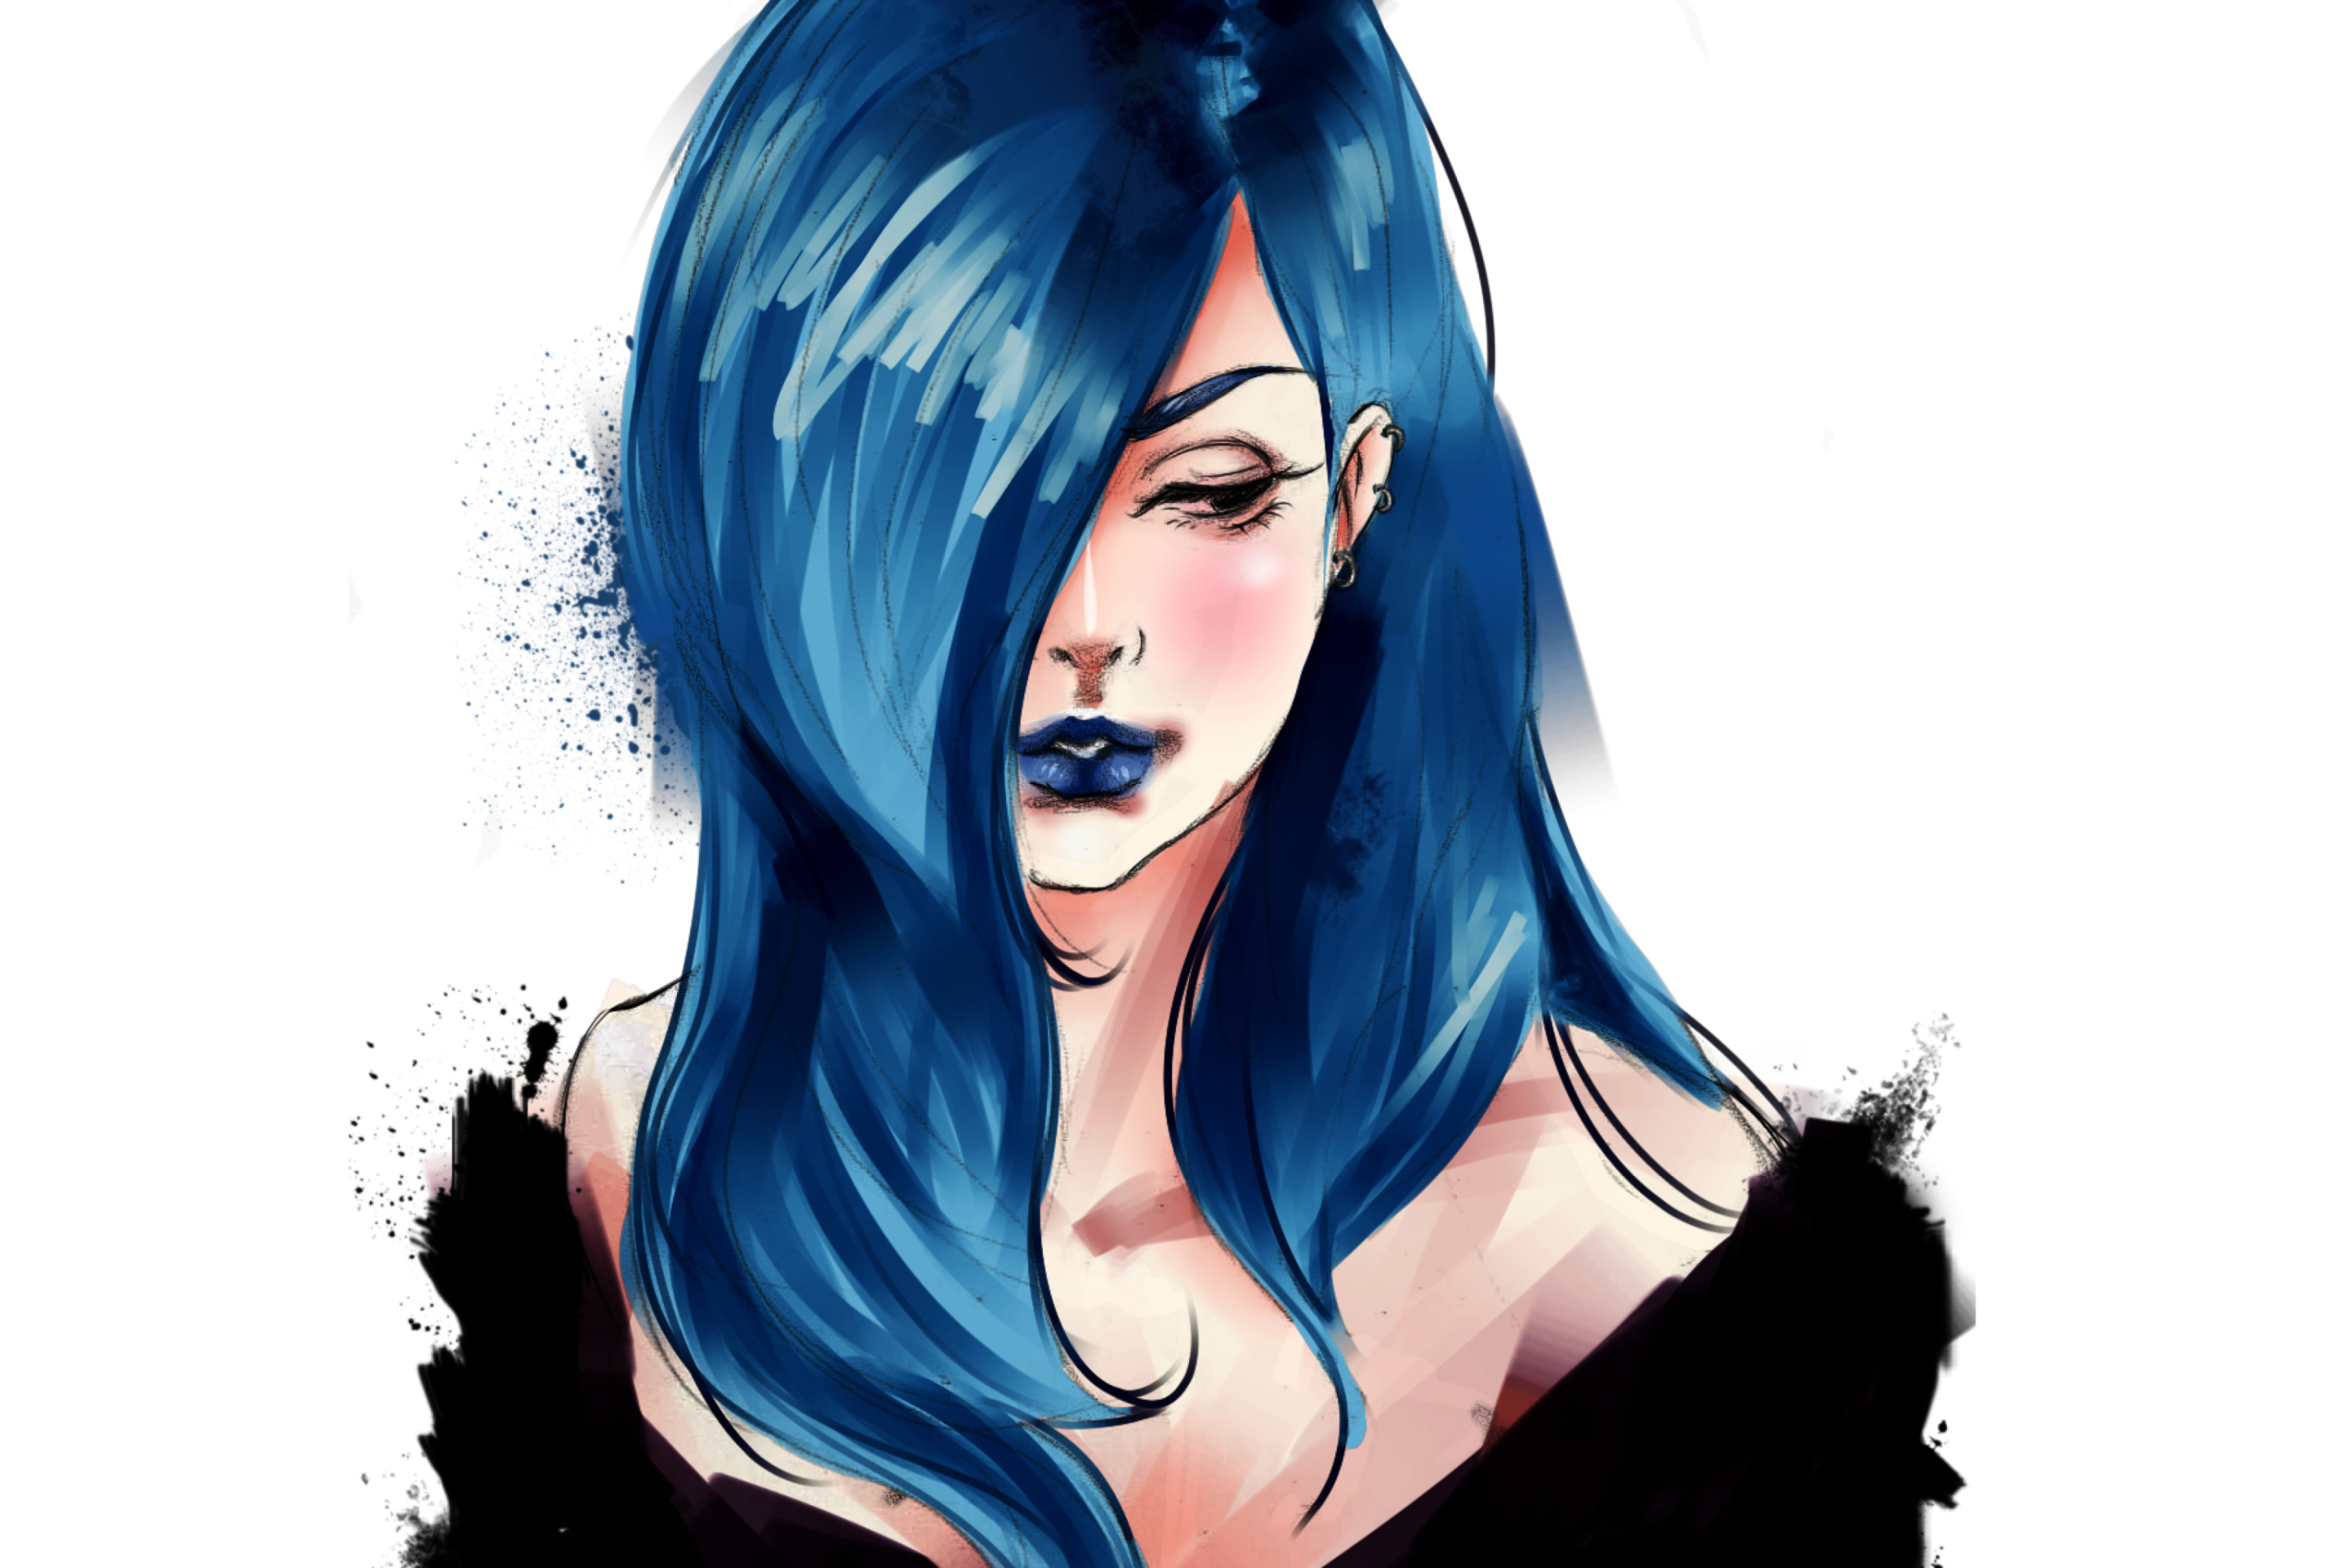 Girl With Blue Hair Painting wallpaper 2880x1920